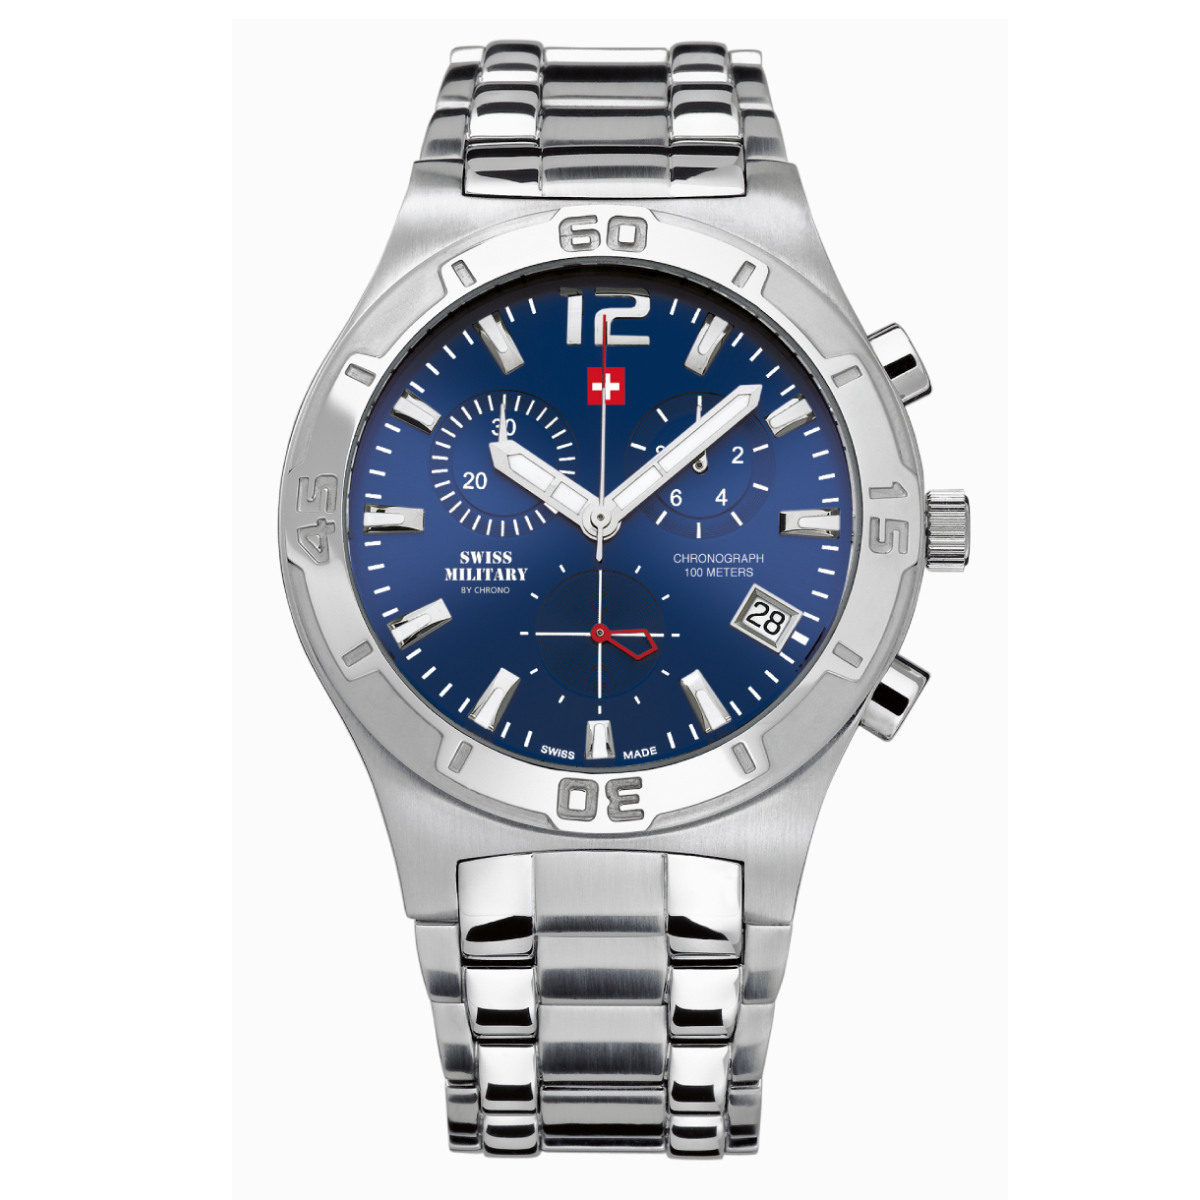 Swiss Military Gents Chronograph Watch SM34015.03 - Swiss Made Luxury Watch Luxury Watches For Men Men’s Stainless Steel Watch Men's Blue Dial Watches